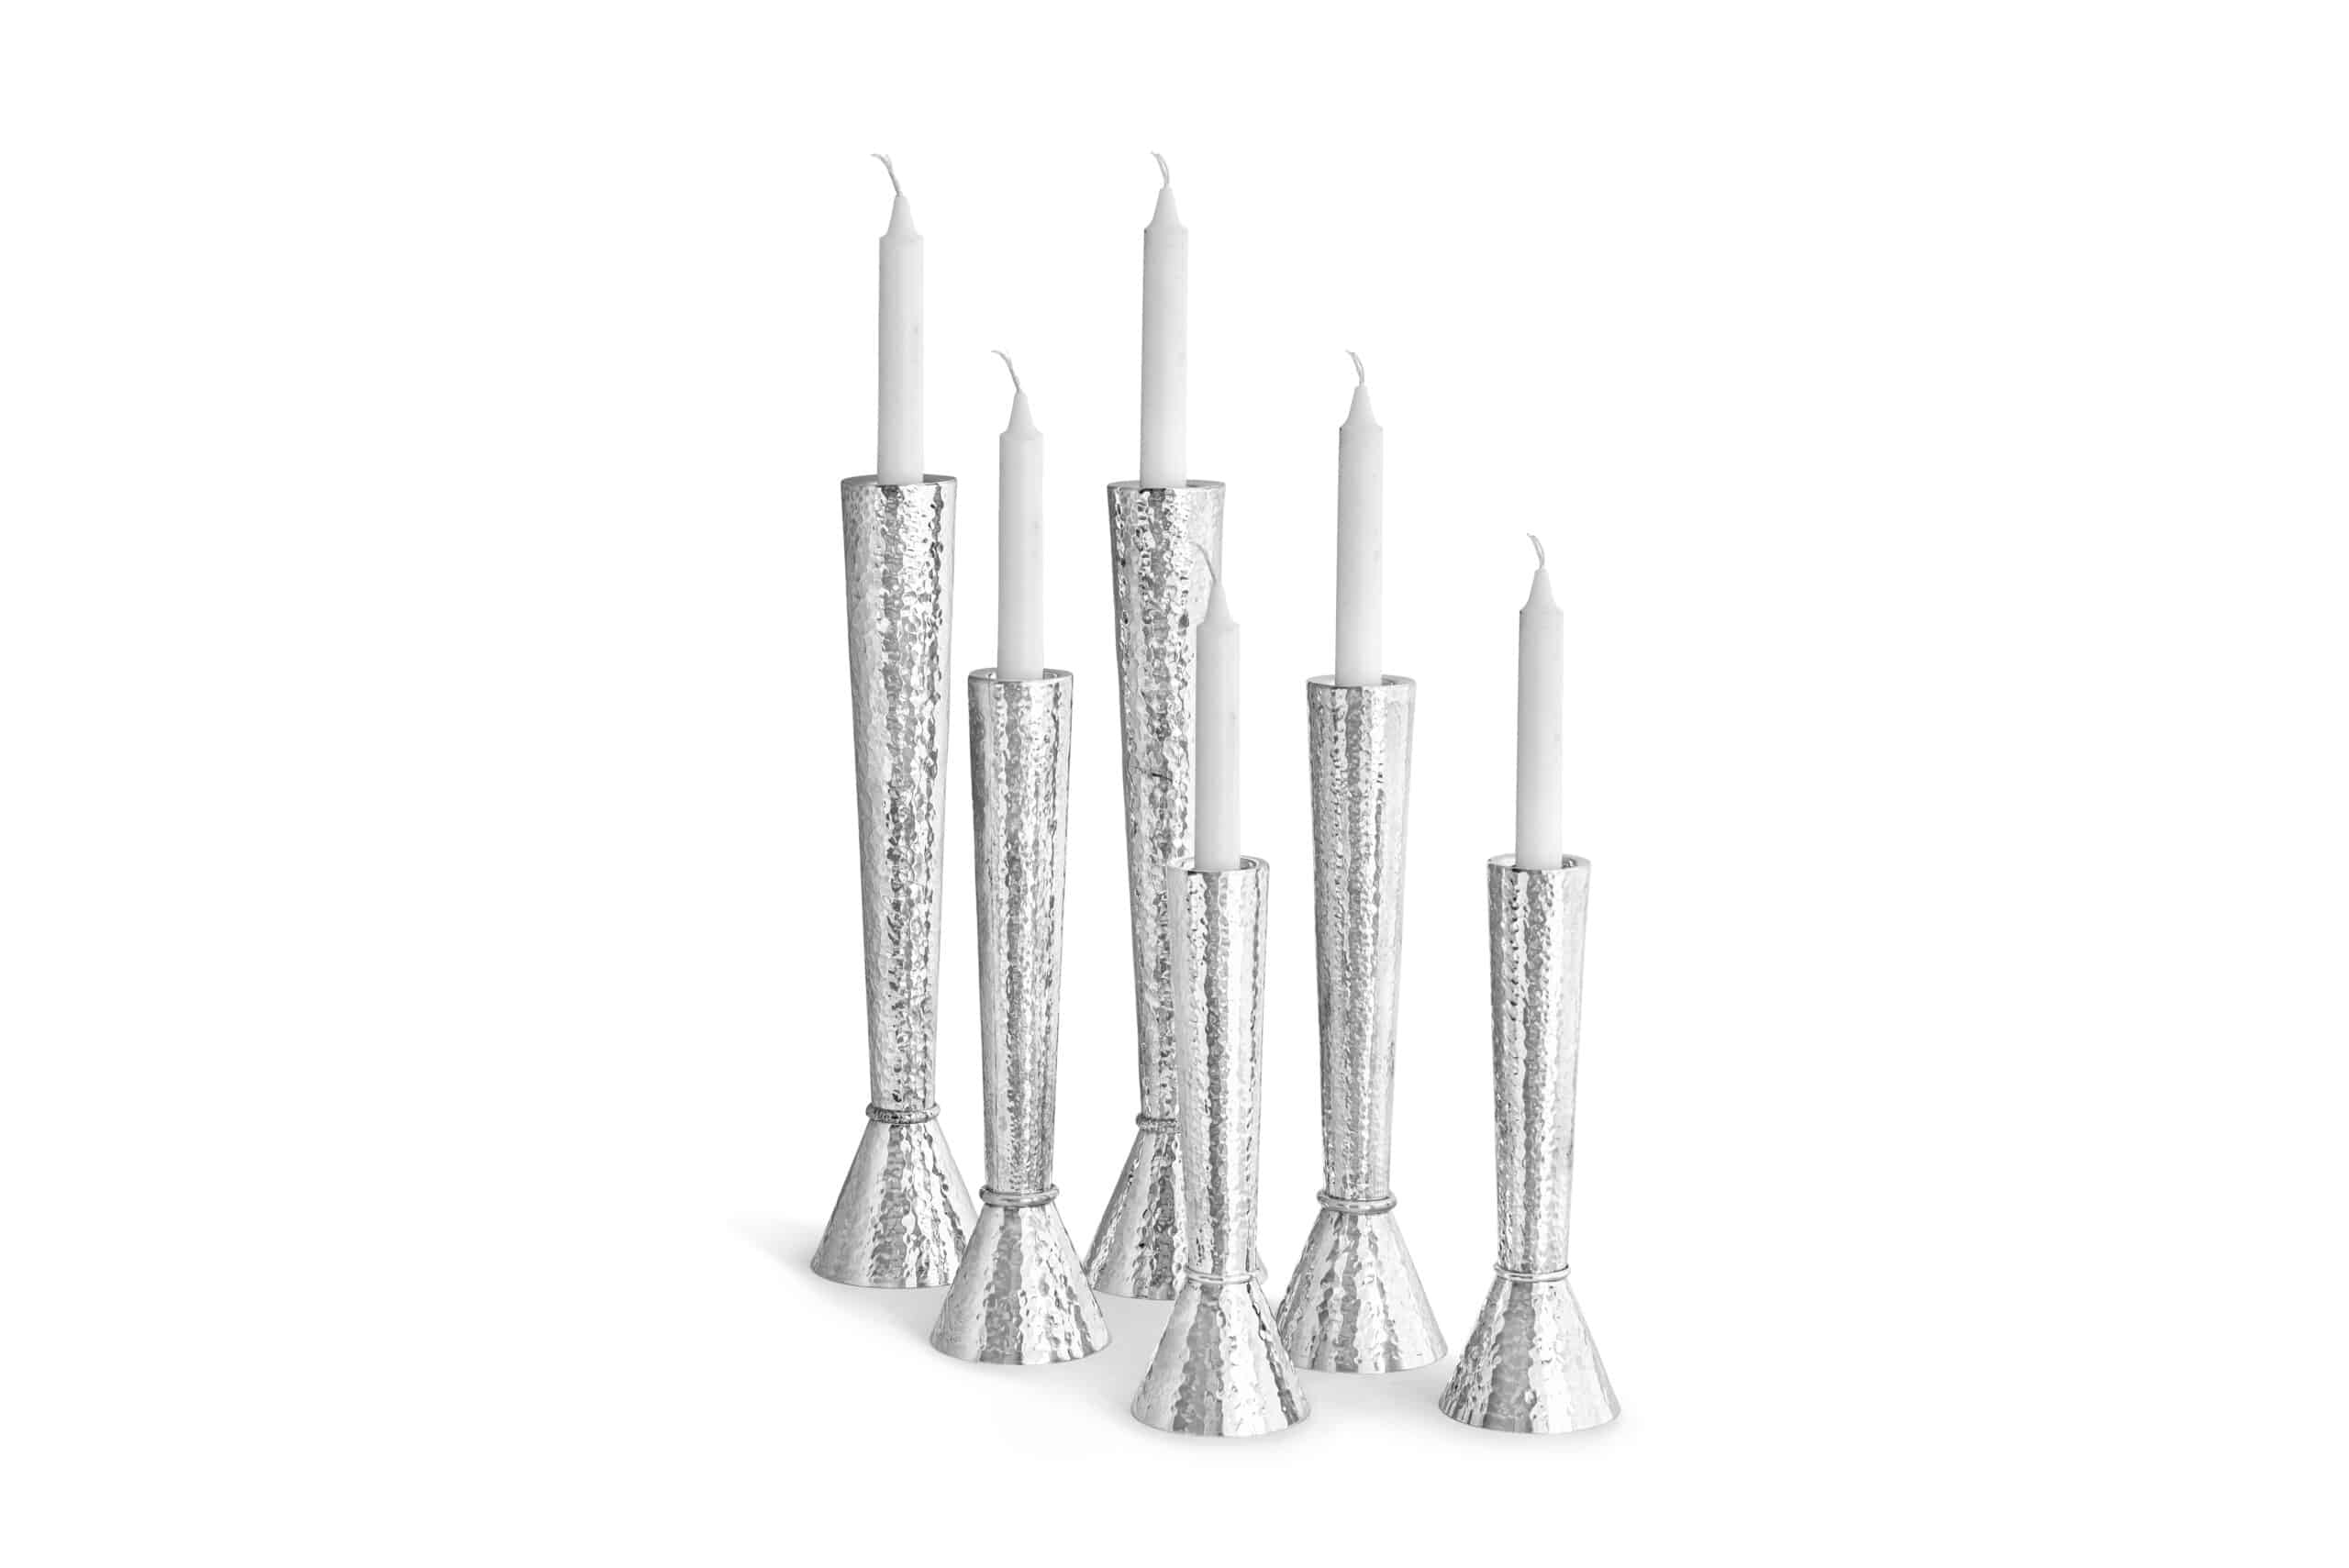 Hammered Pair of Candlesticks Made of Sterling Silver